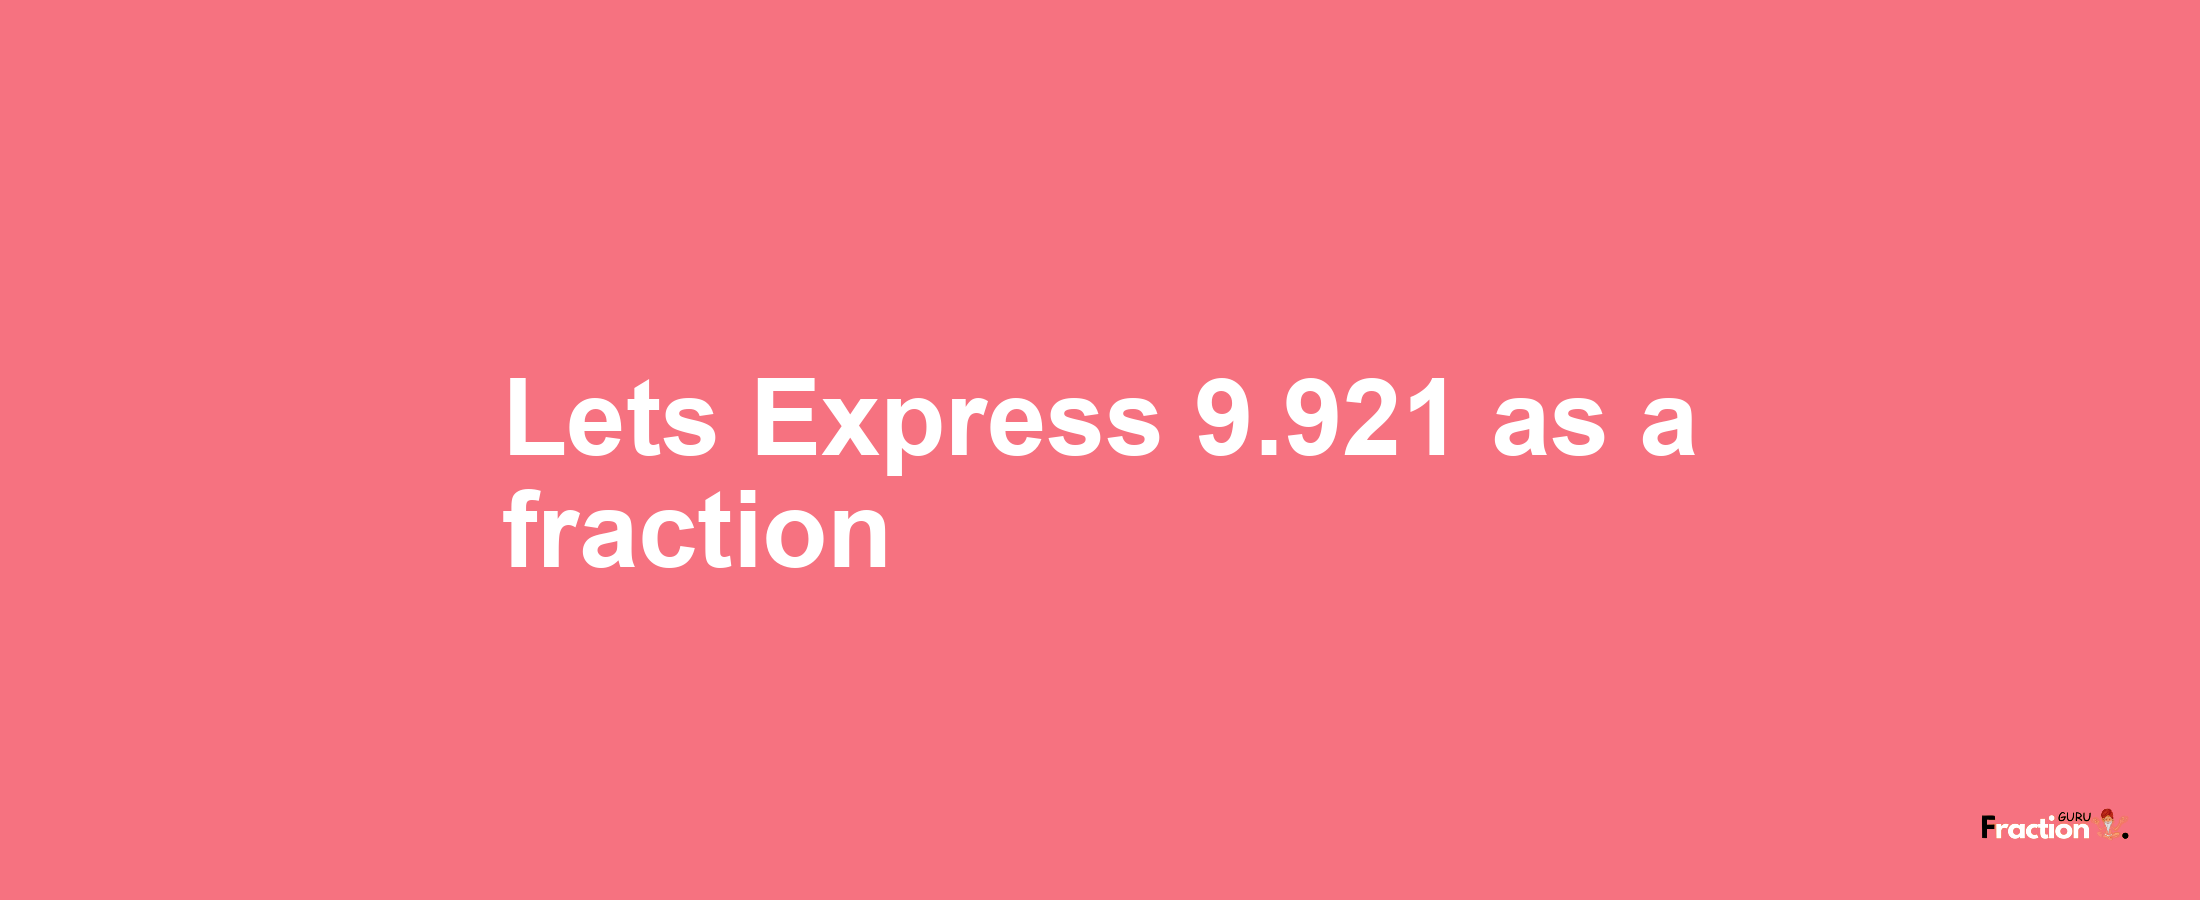 Lets Express 9.921 as afraction